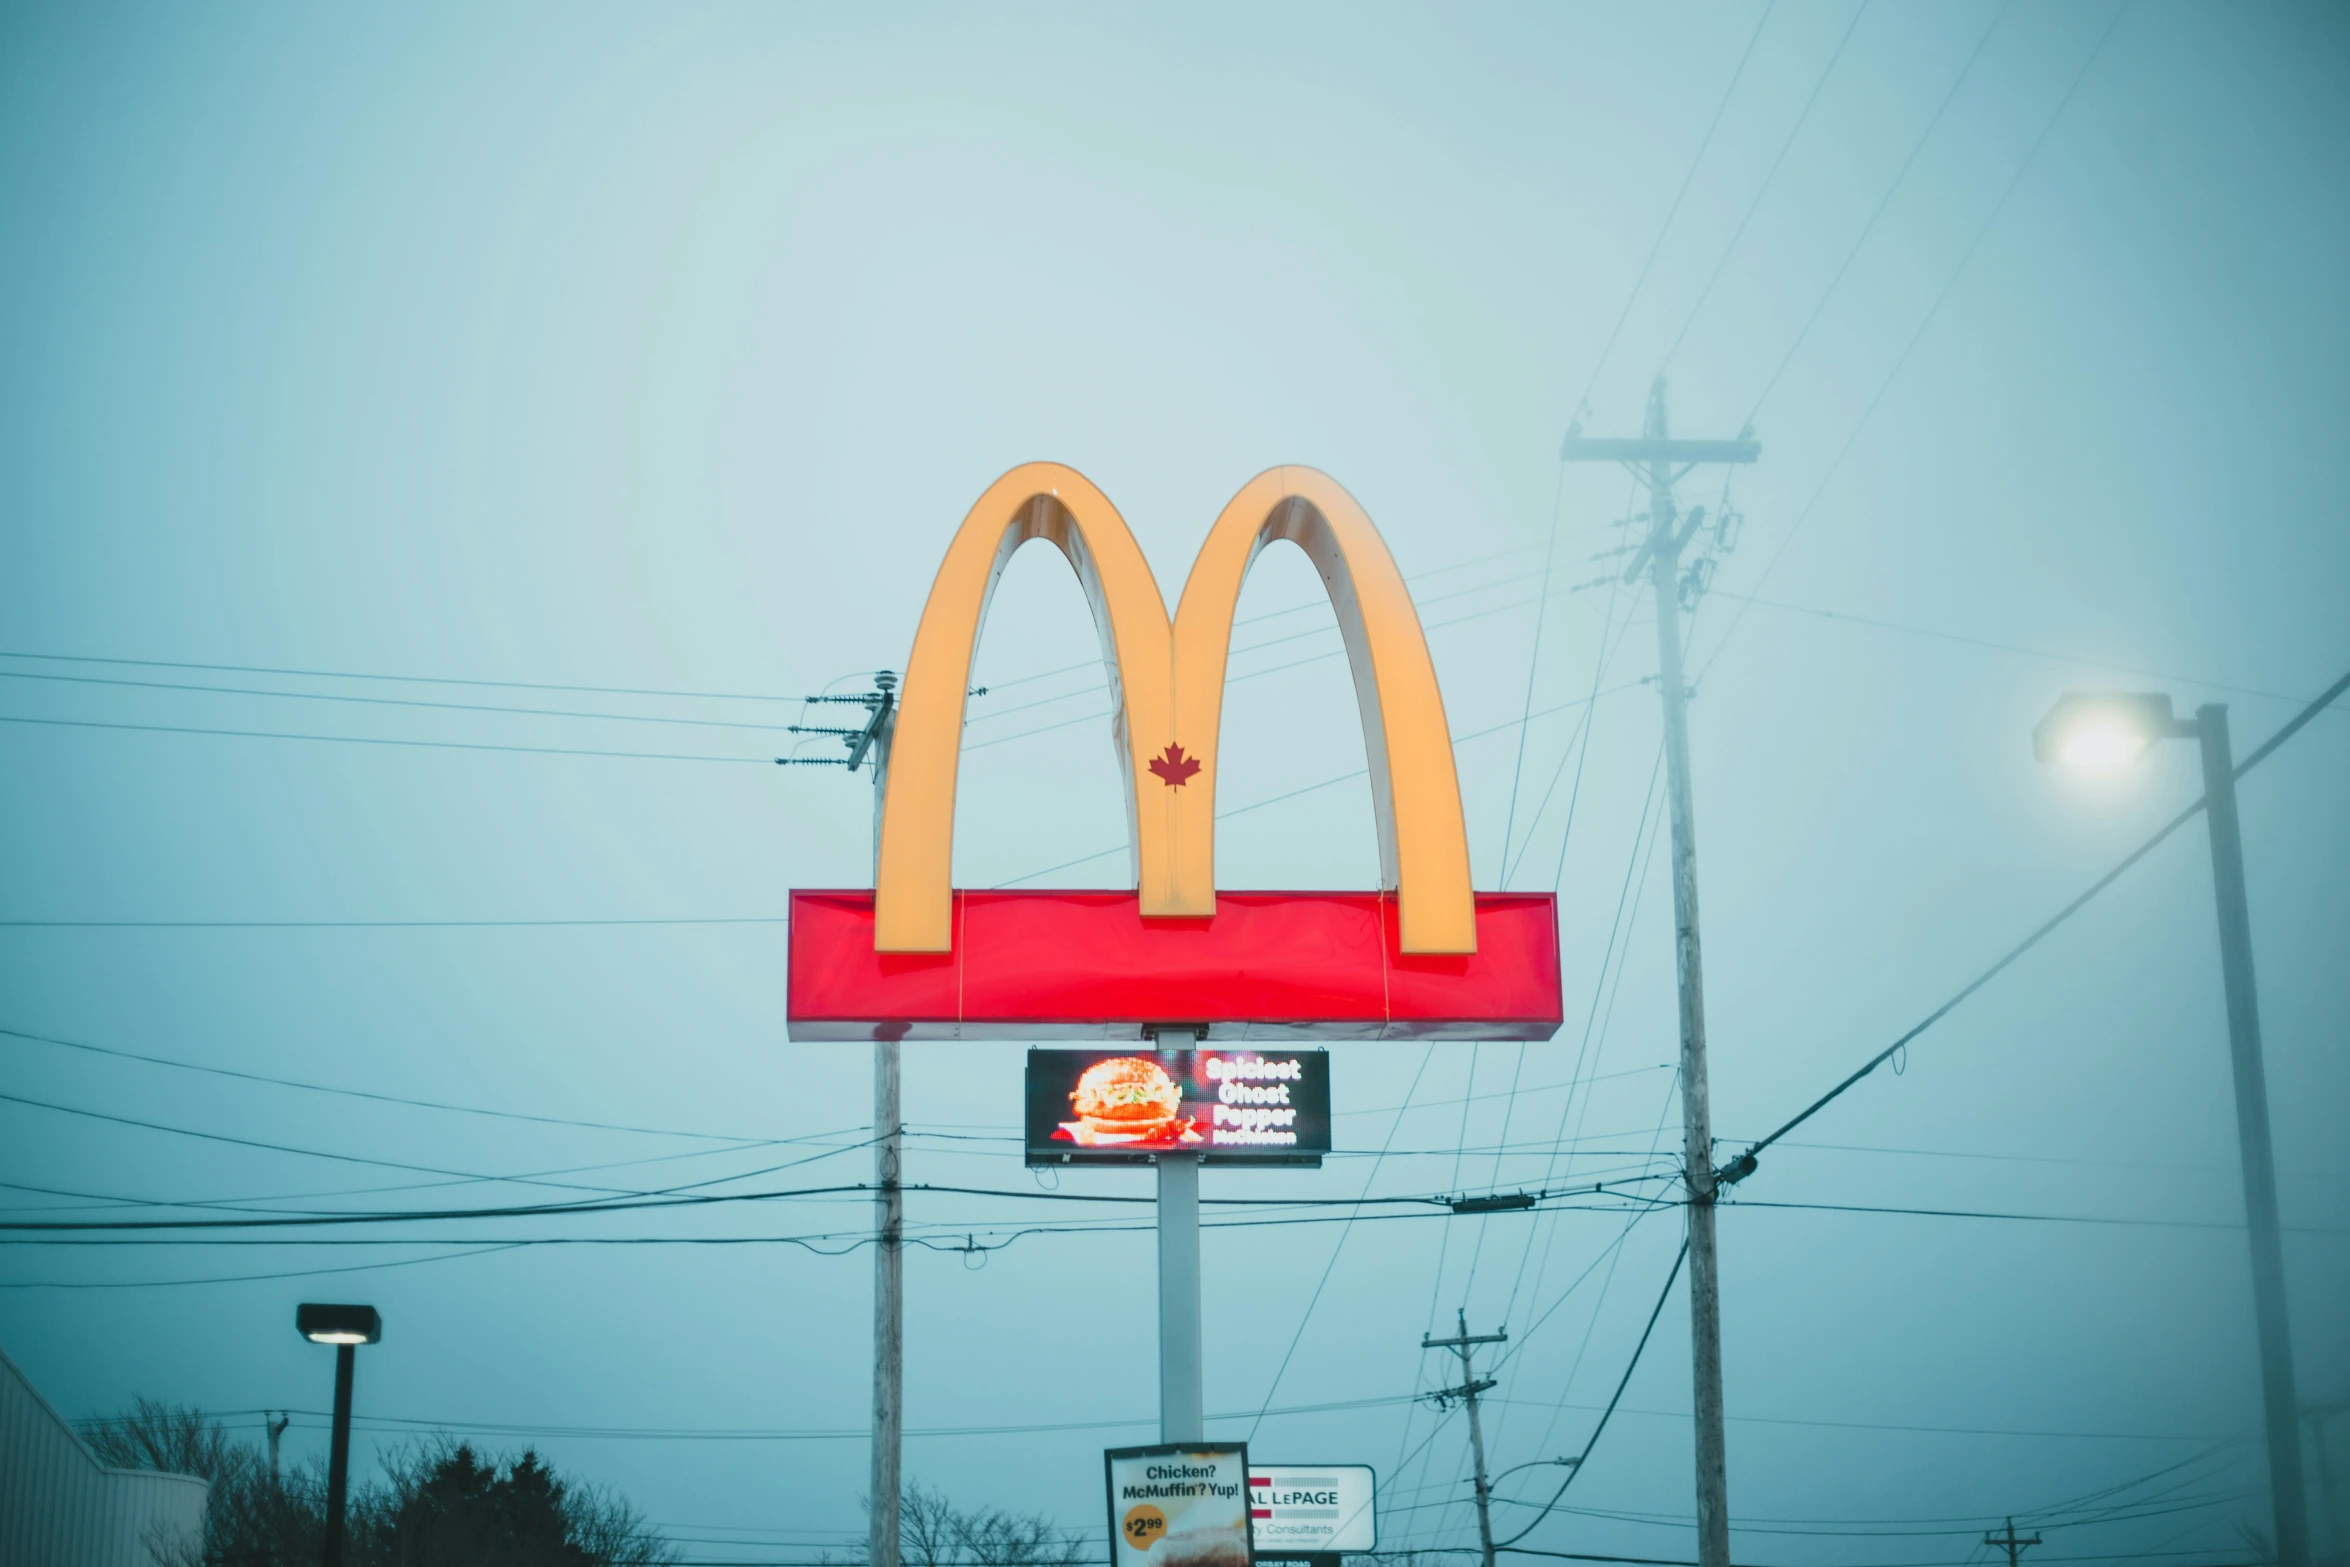 a red and yellow mcdonald's sign with a blue sky behind it